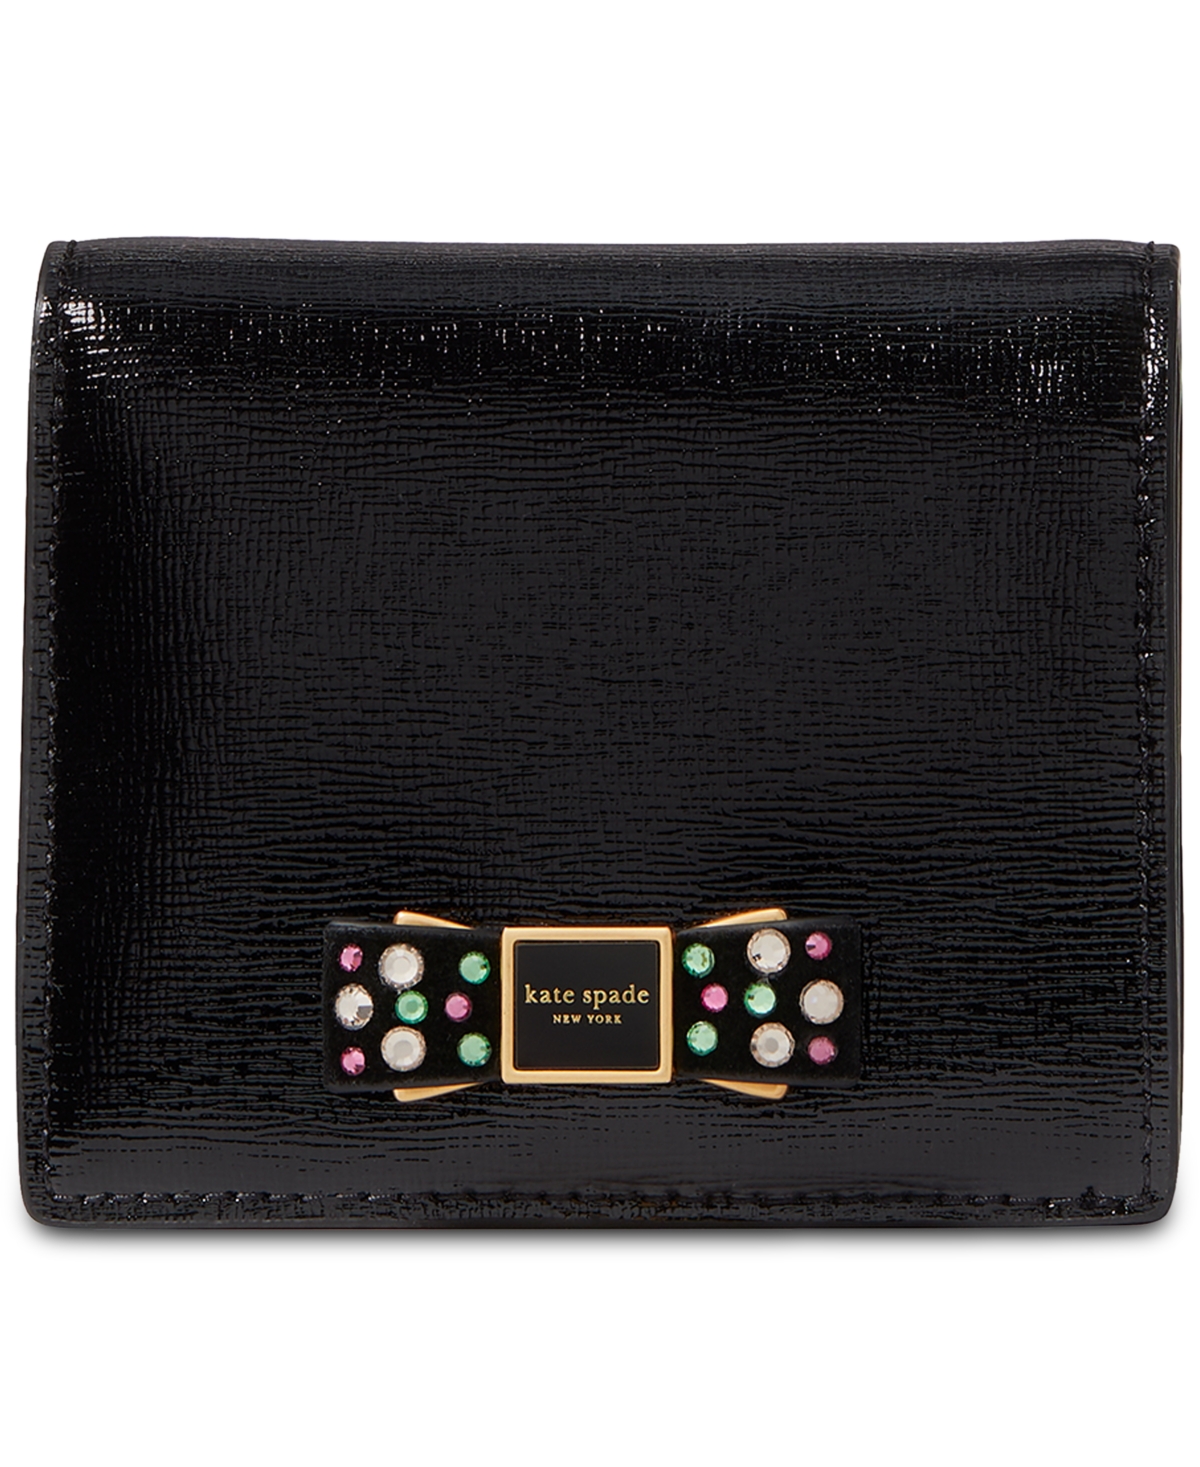 Kate Spade New York Morgan Bedazzled Bow Saffiano Leather Small Bifold Wallet In Black